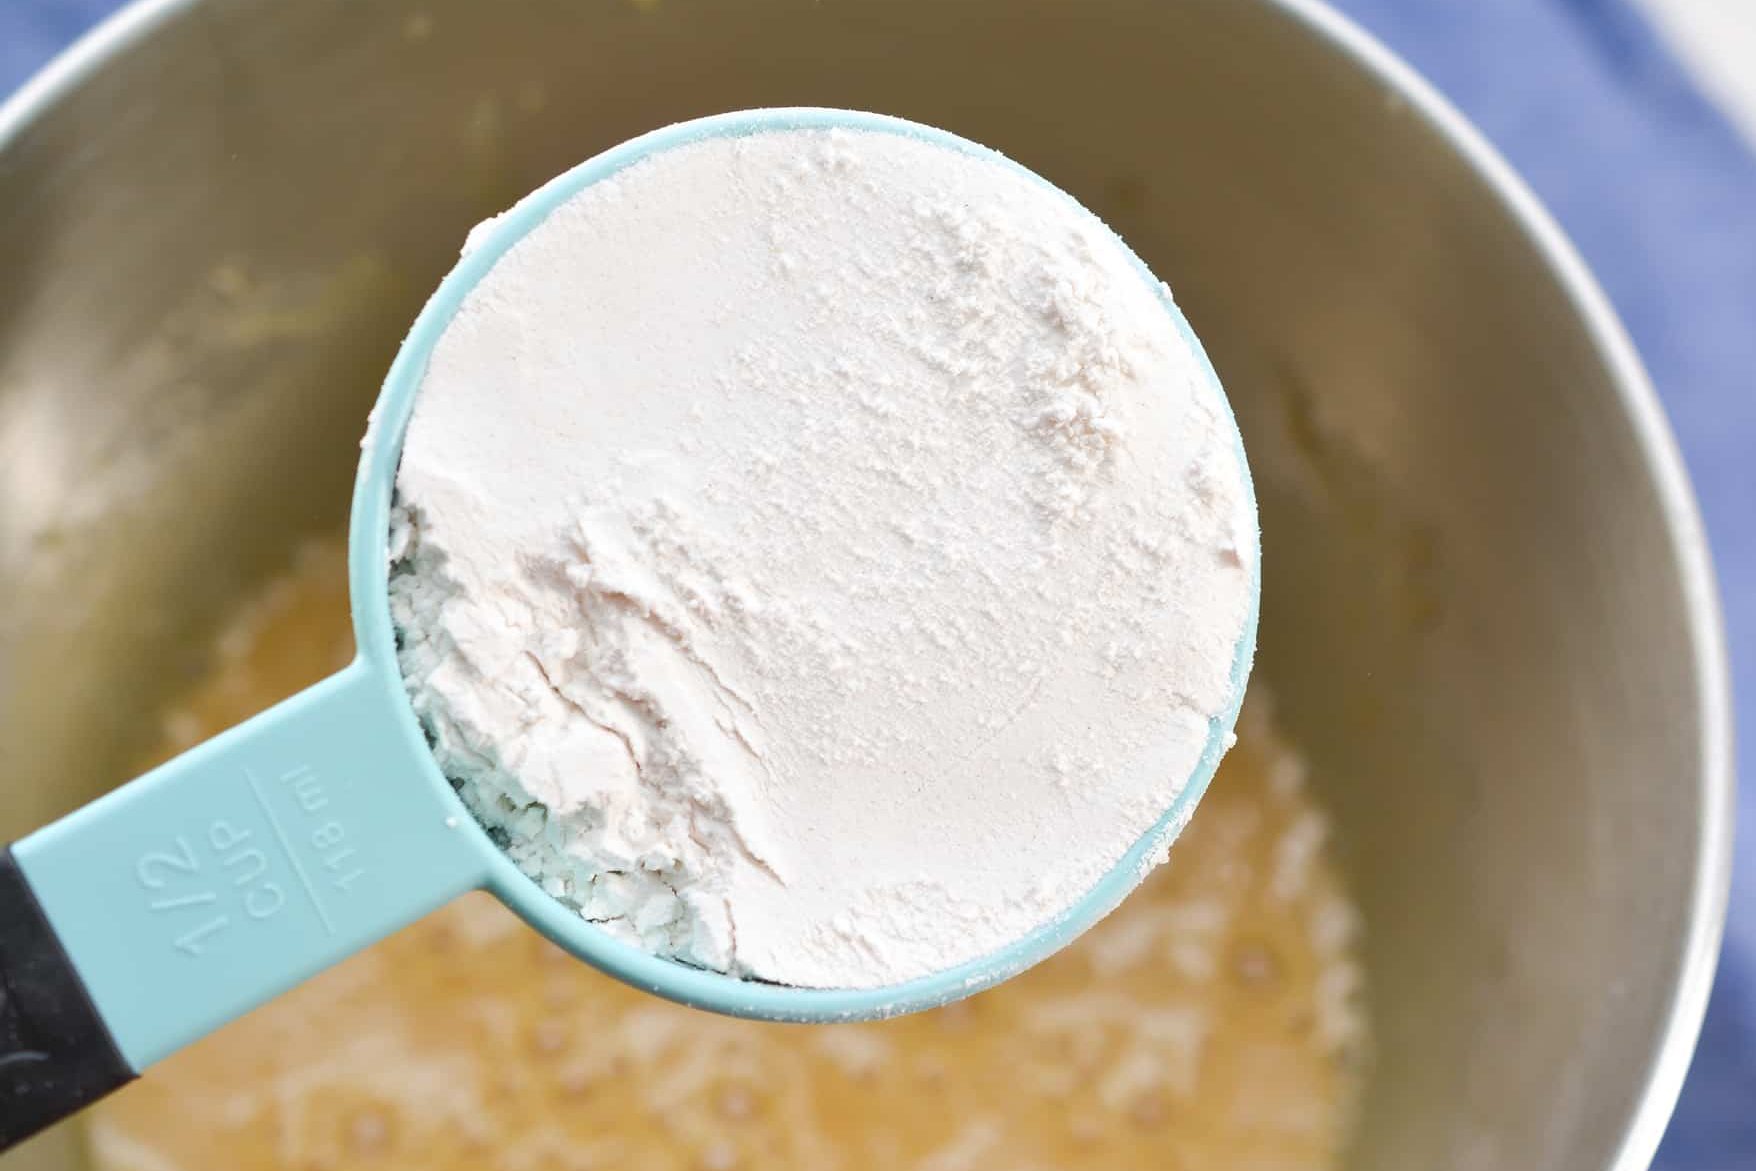 Add the 1 ½ cup of self-rising flour to the mixing bowl.